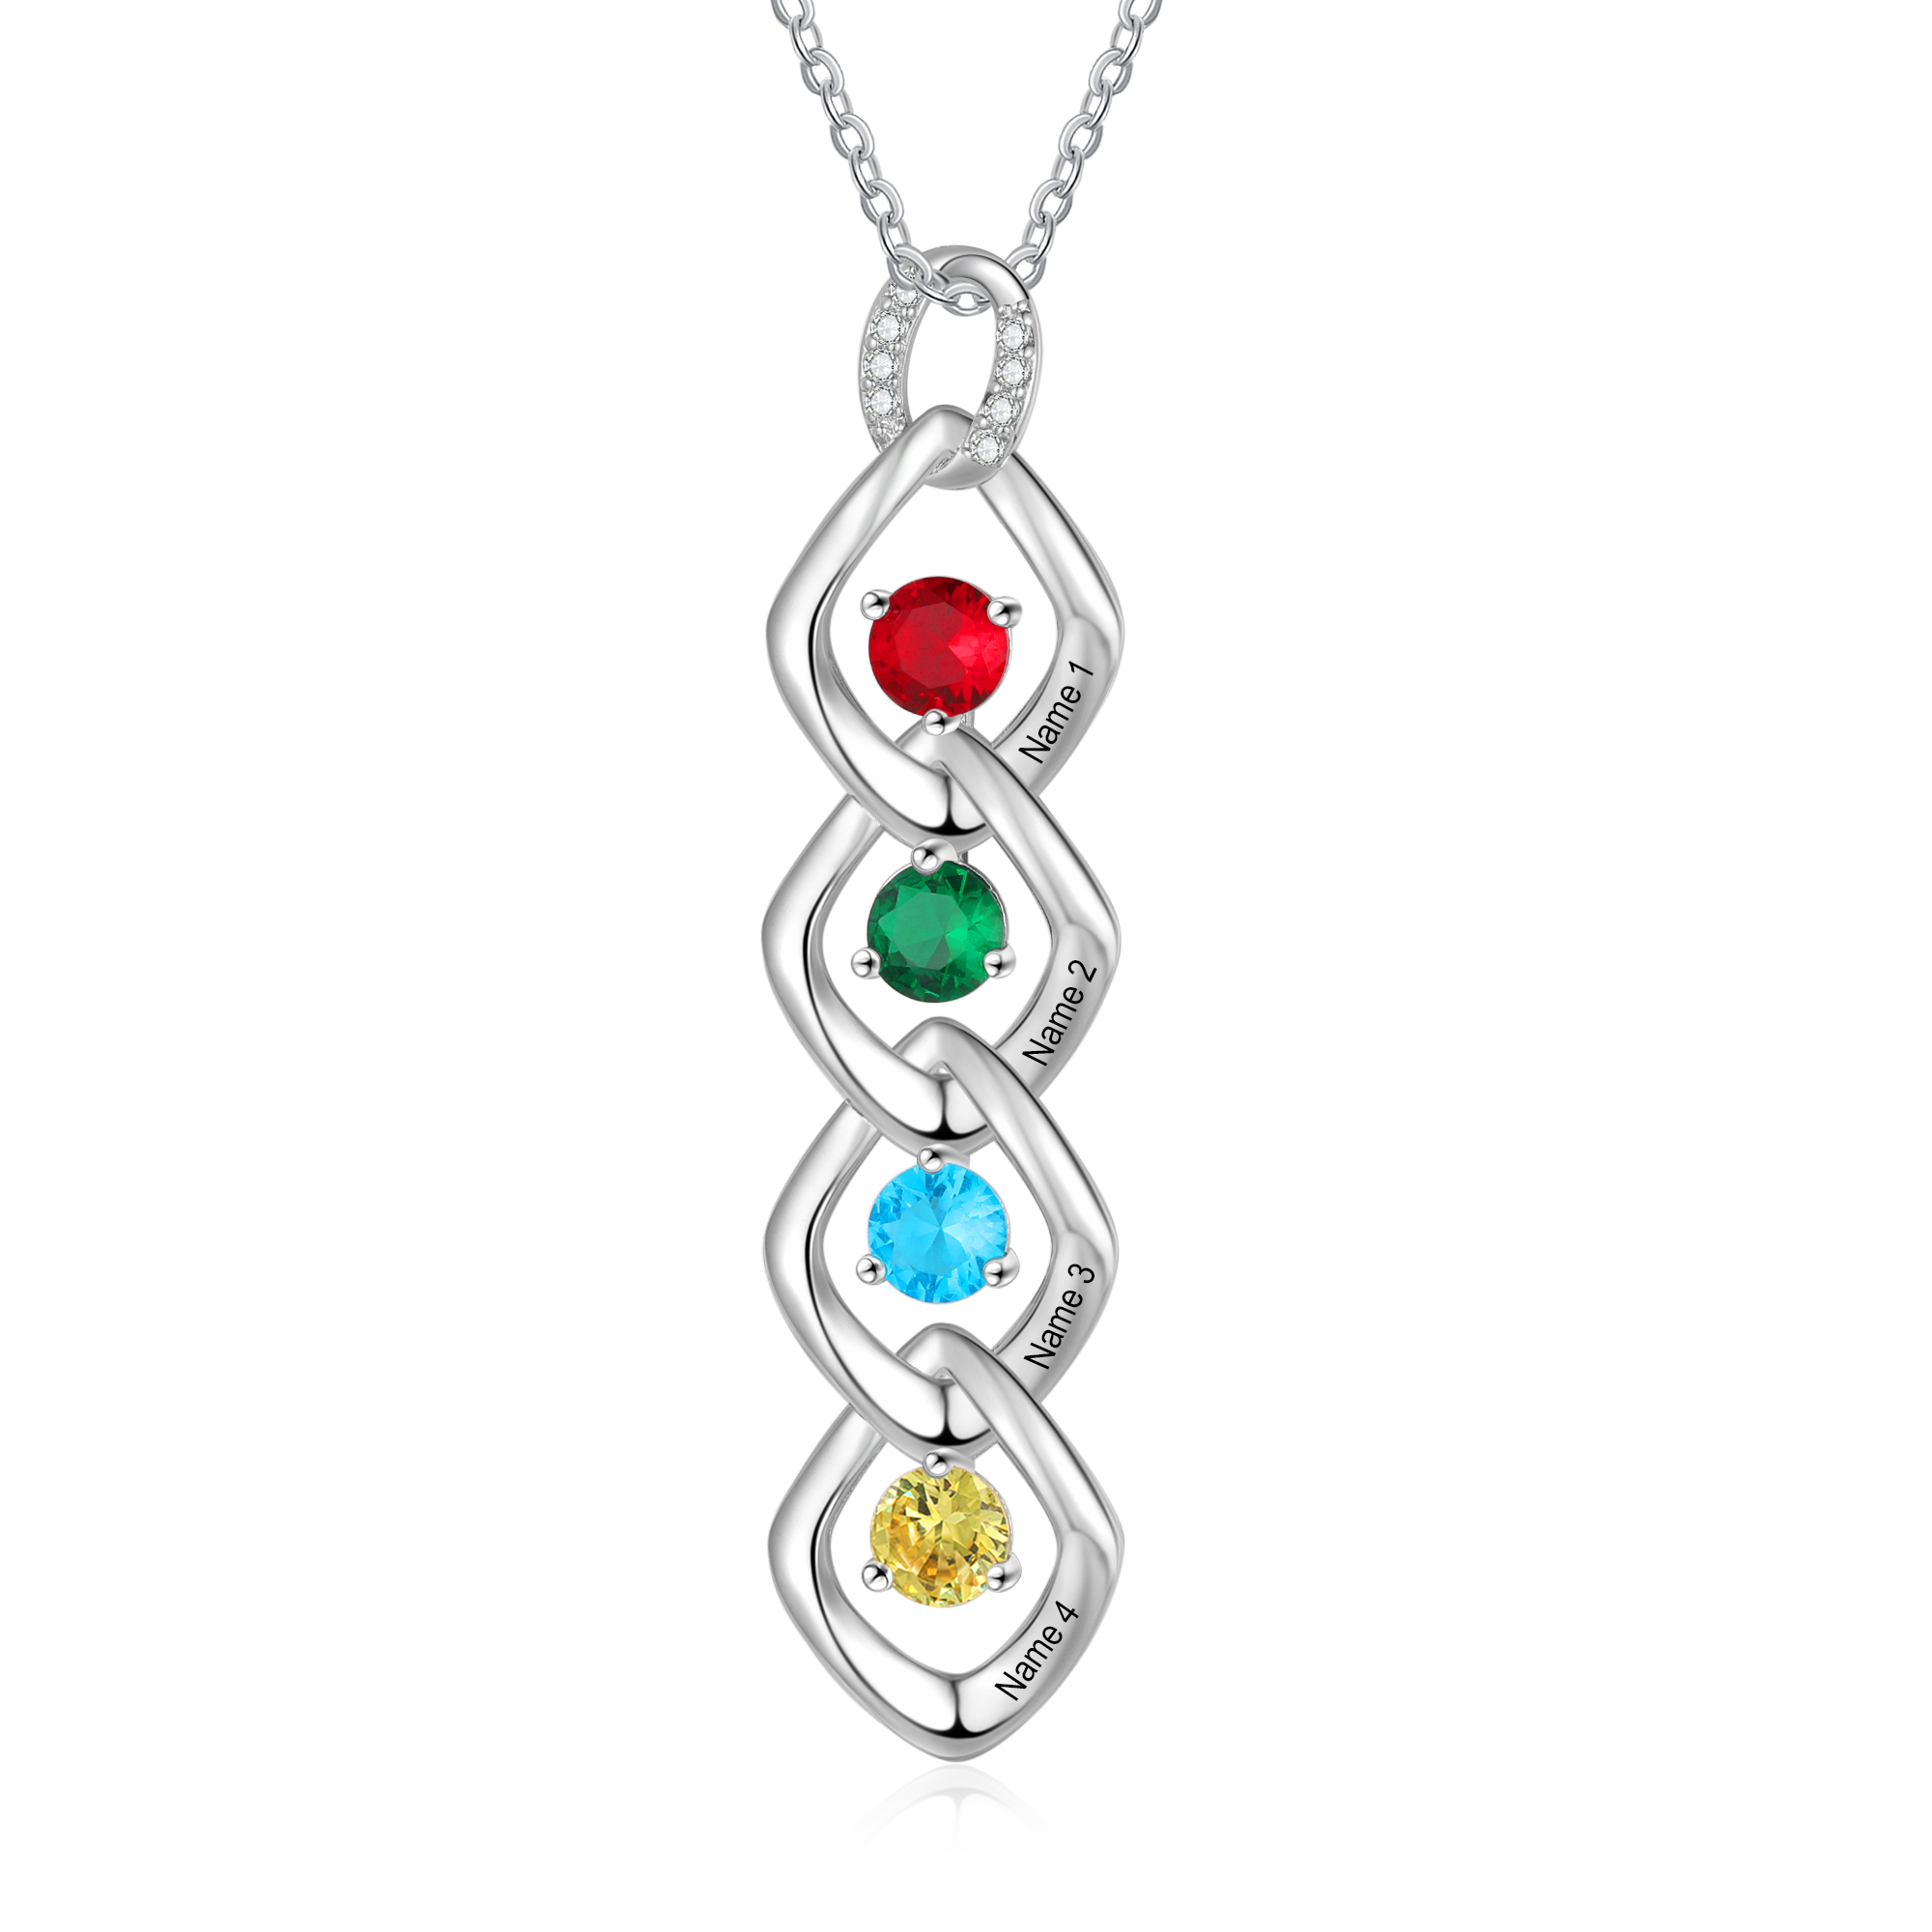 4 Names - Personalized Birthstone Necklace With Name Engraved For A Sp